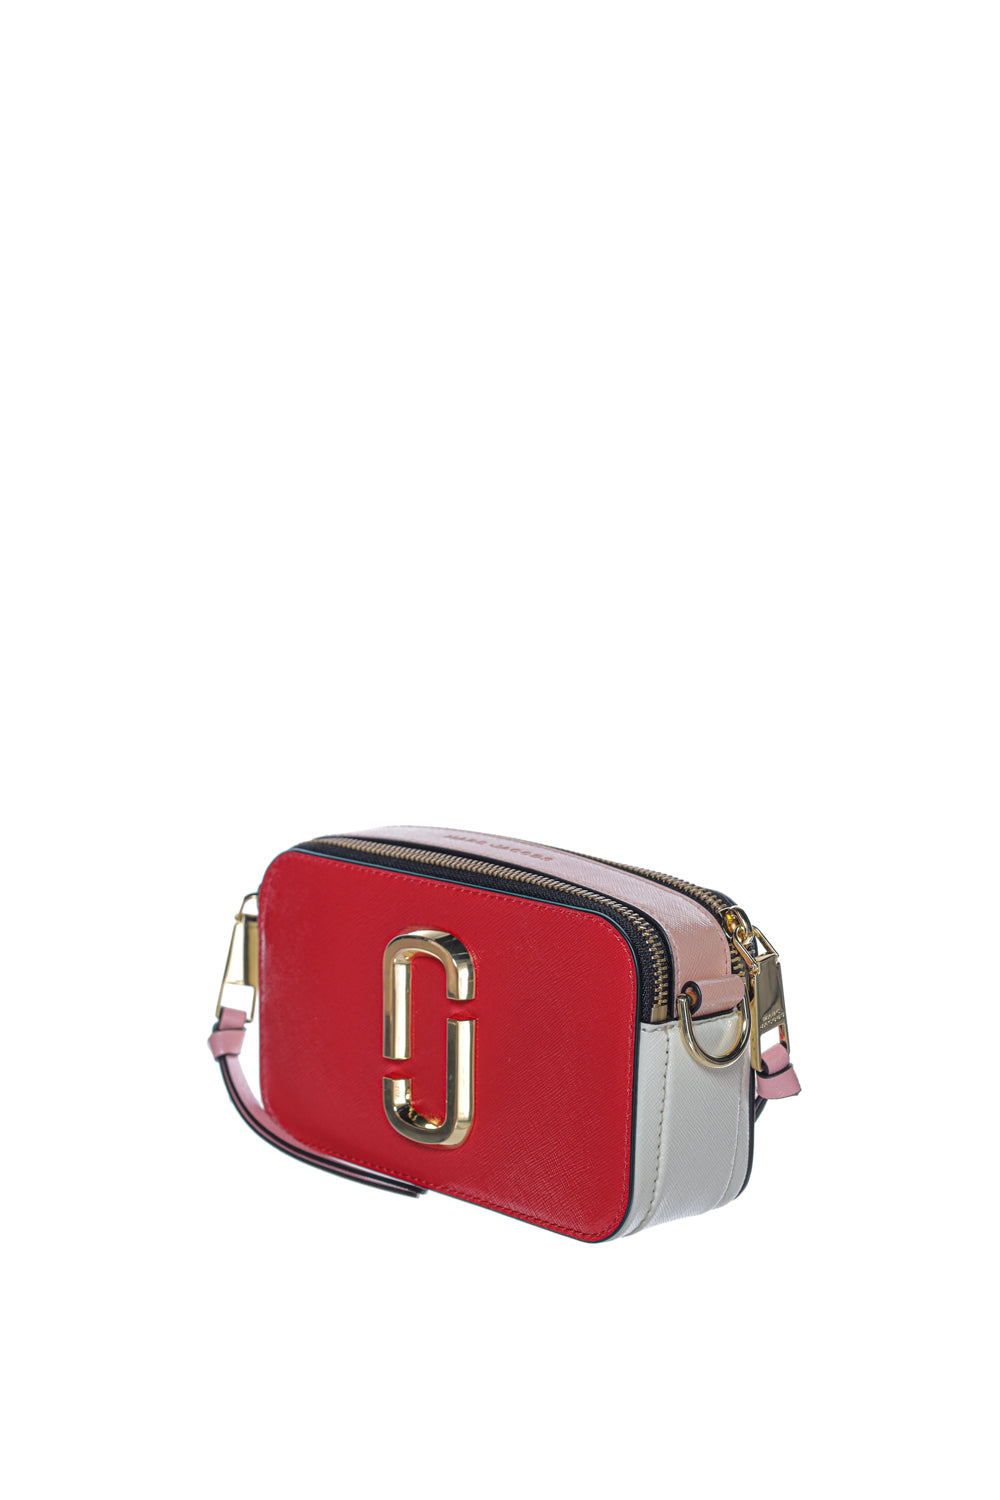 geanta marc jacobs - lateral